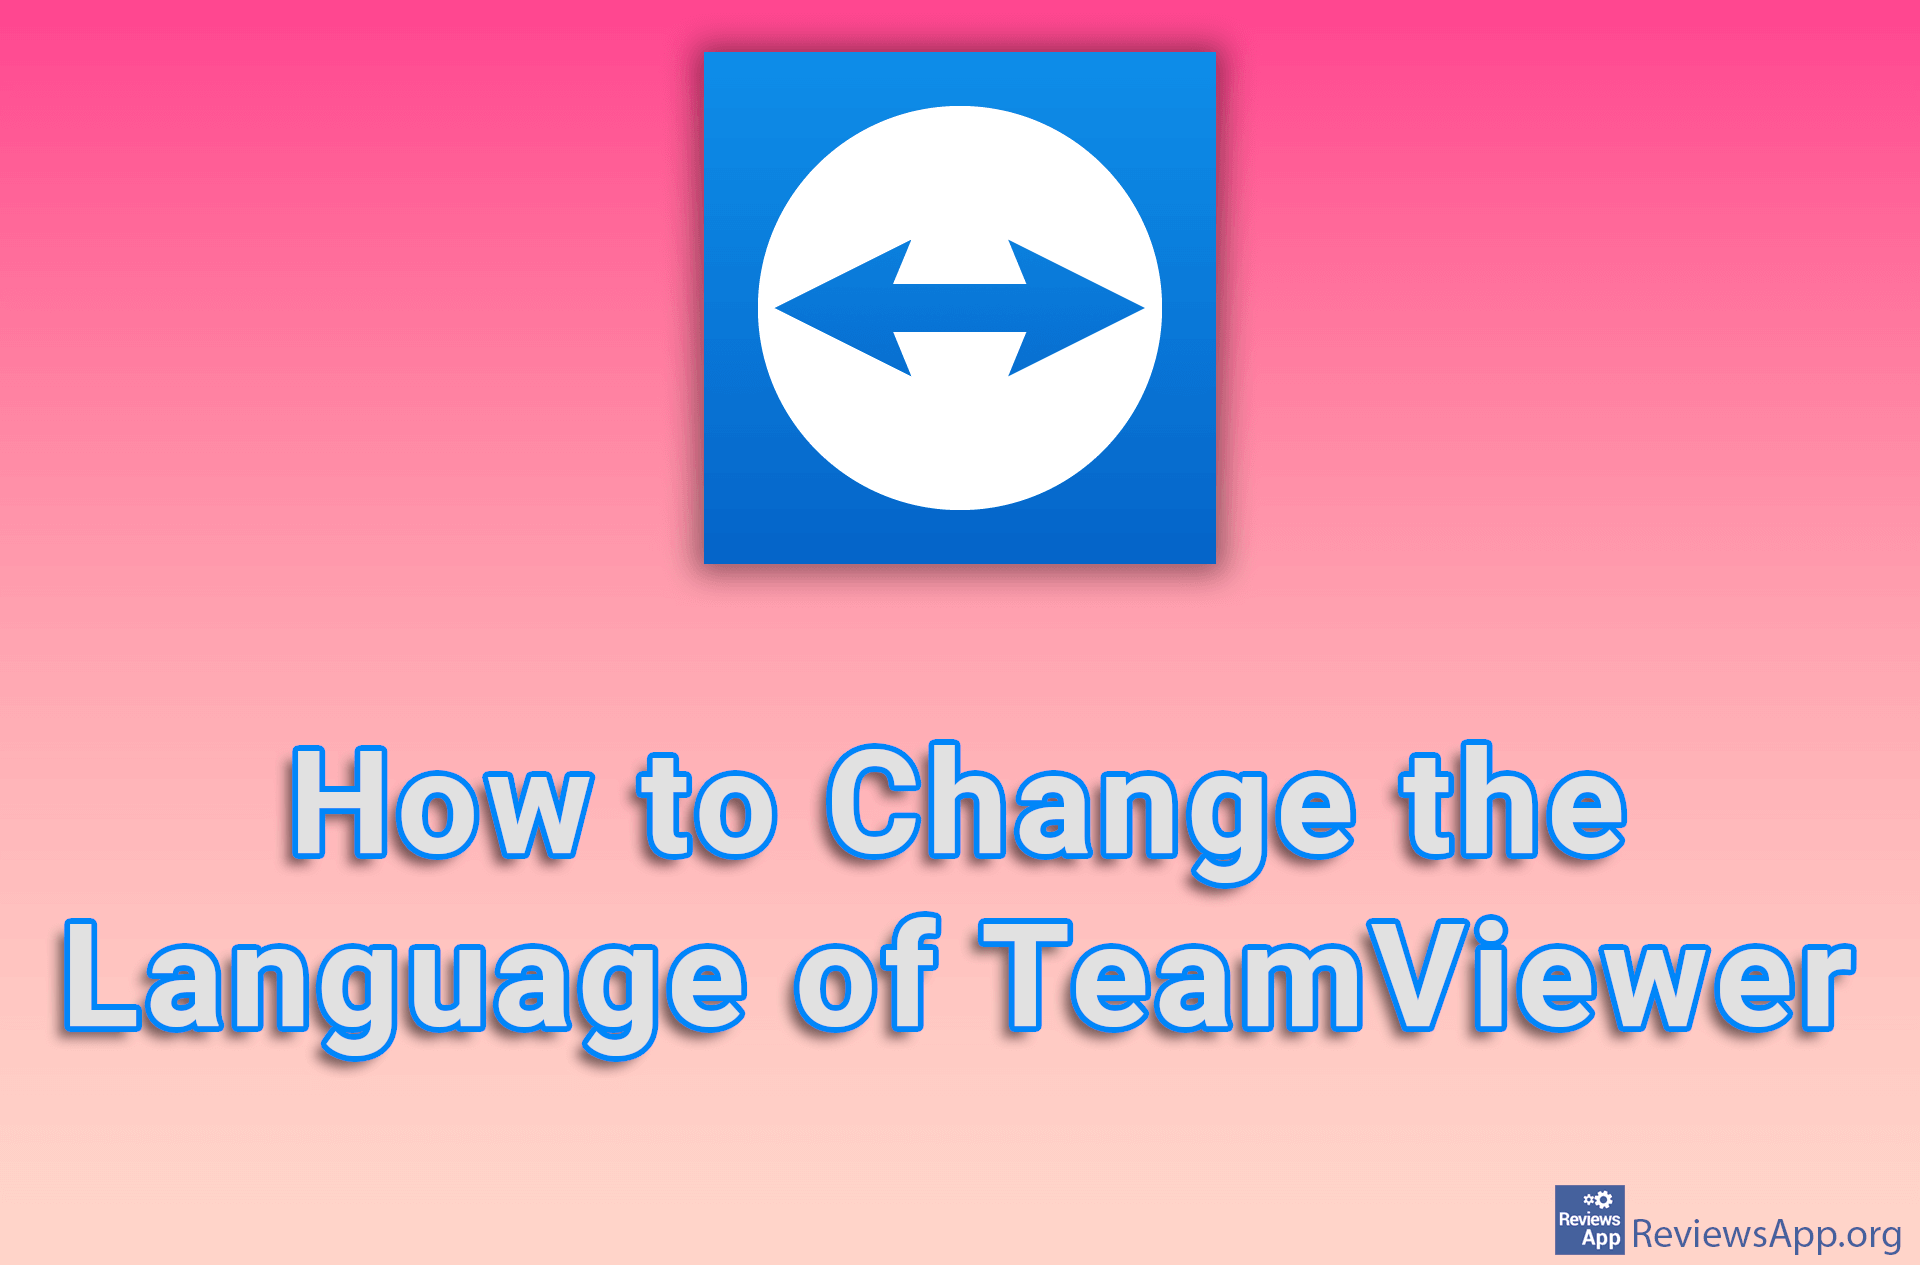 How to Change the Language of TeamViewer